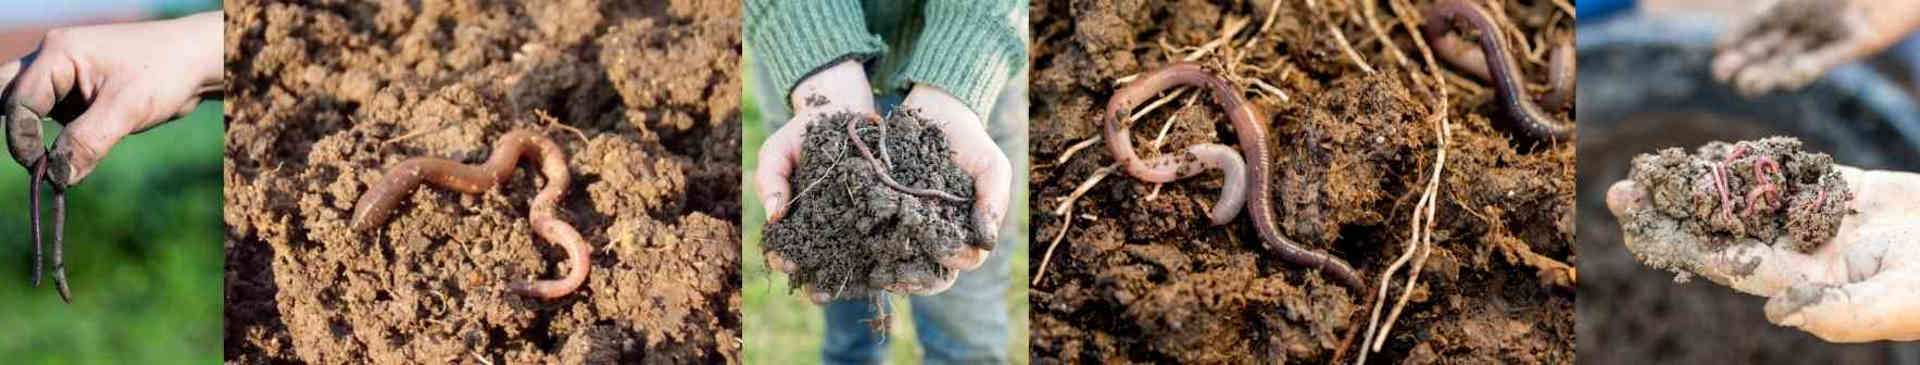 Why Your Soil Needs Earthworms, and 5 Ways to Attract Them to Your Garden